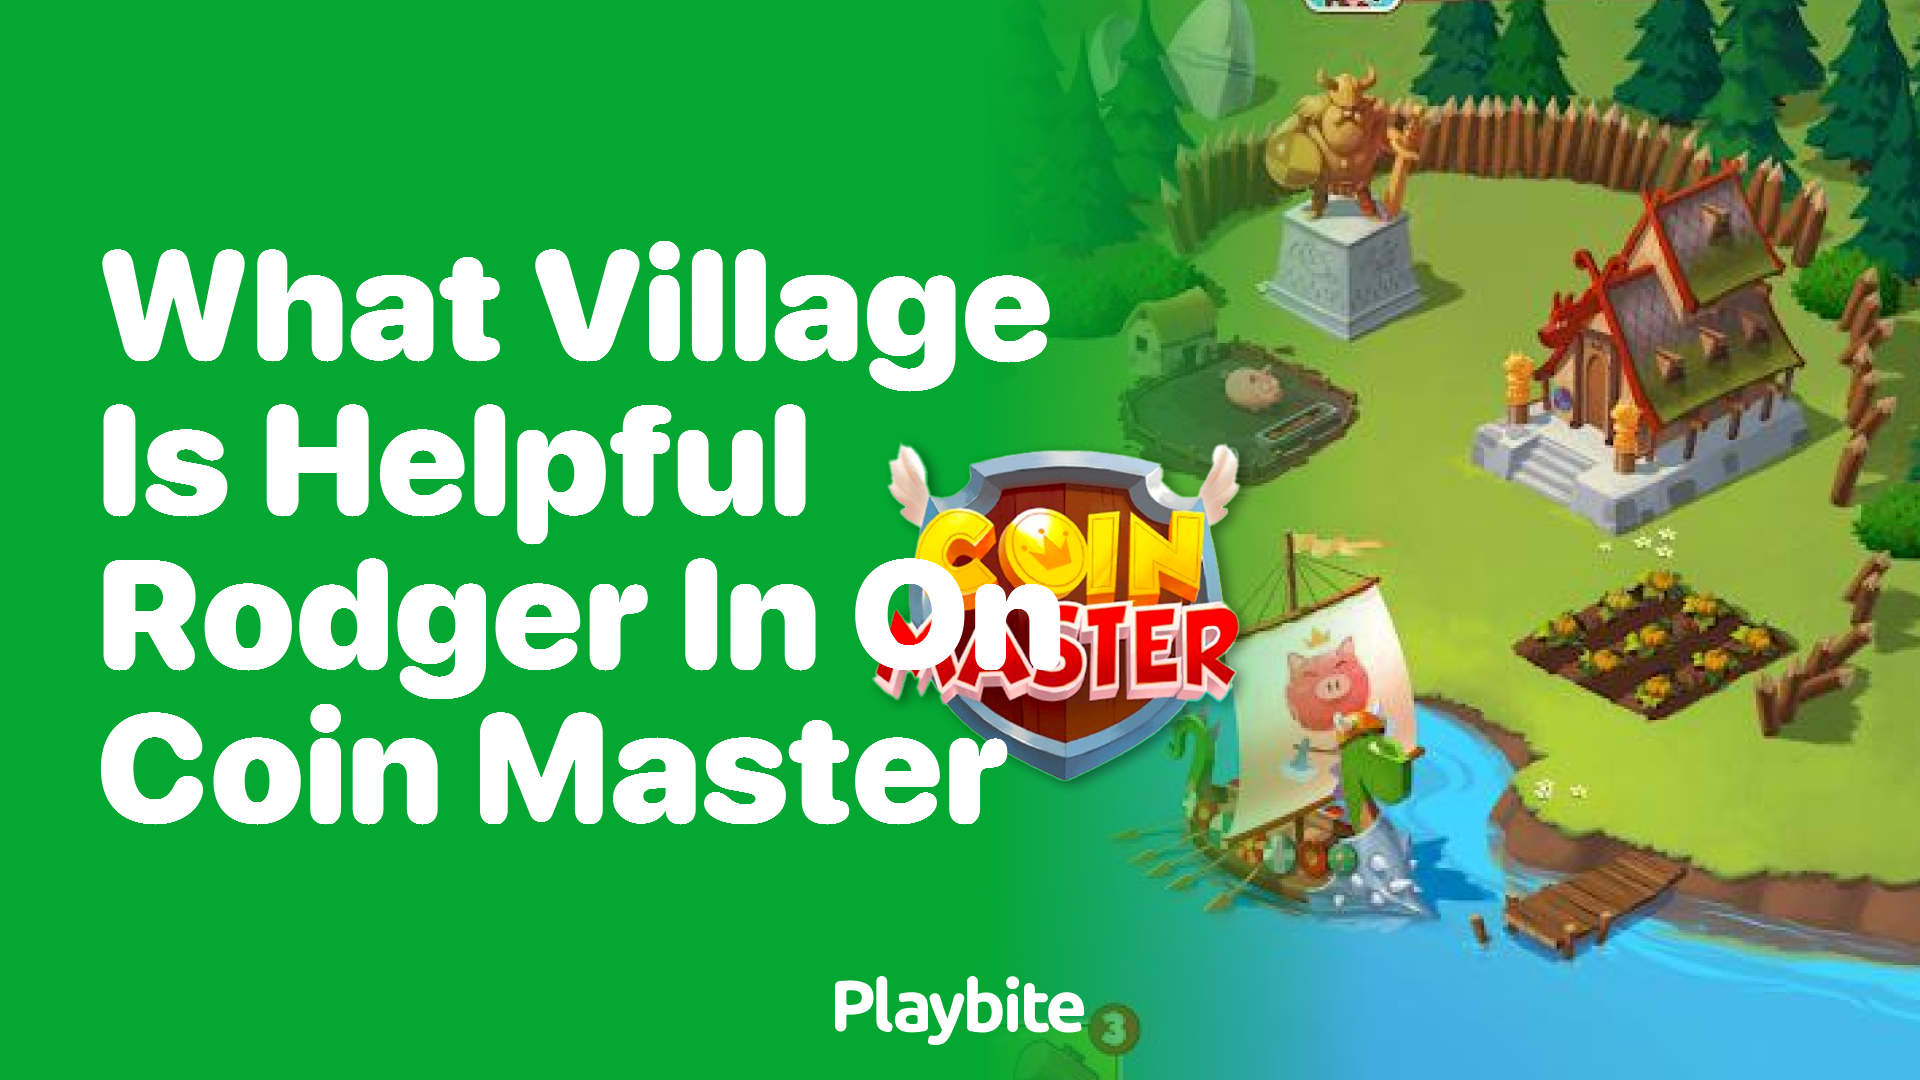 What Village Is Helpful Rodger In on Coin Master?